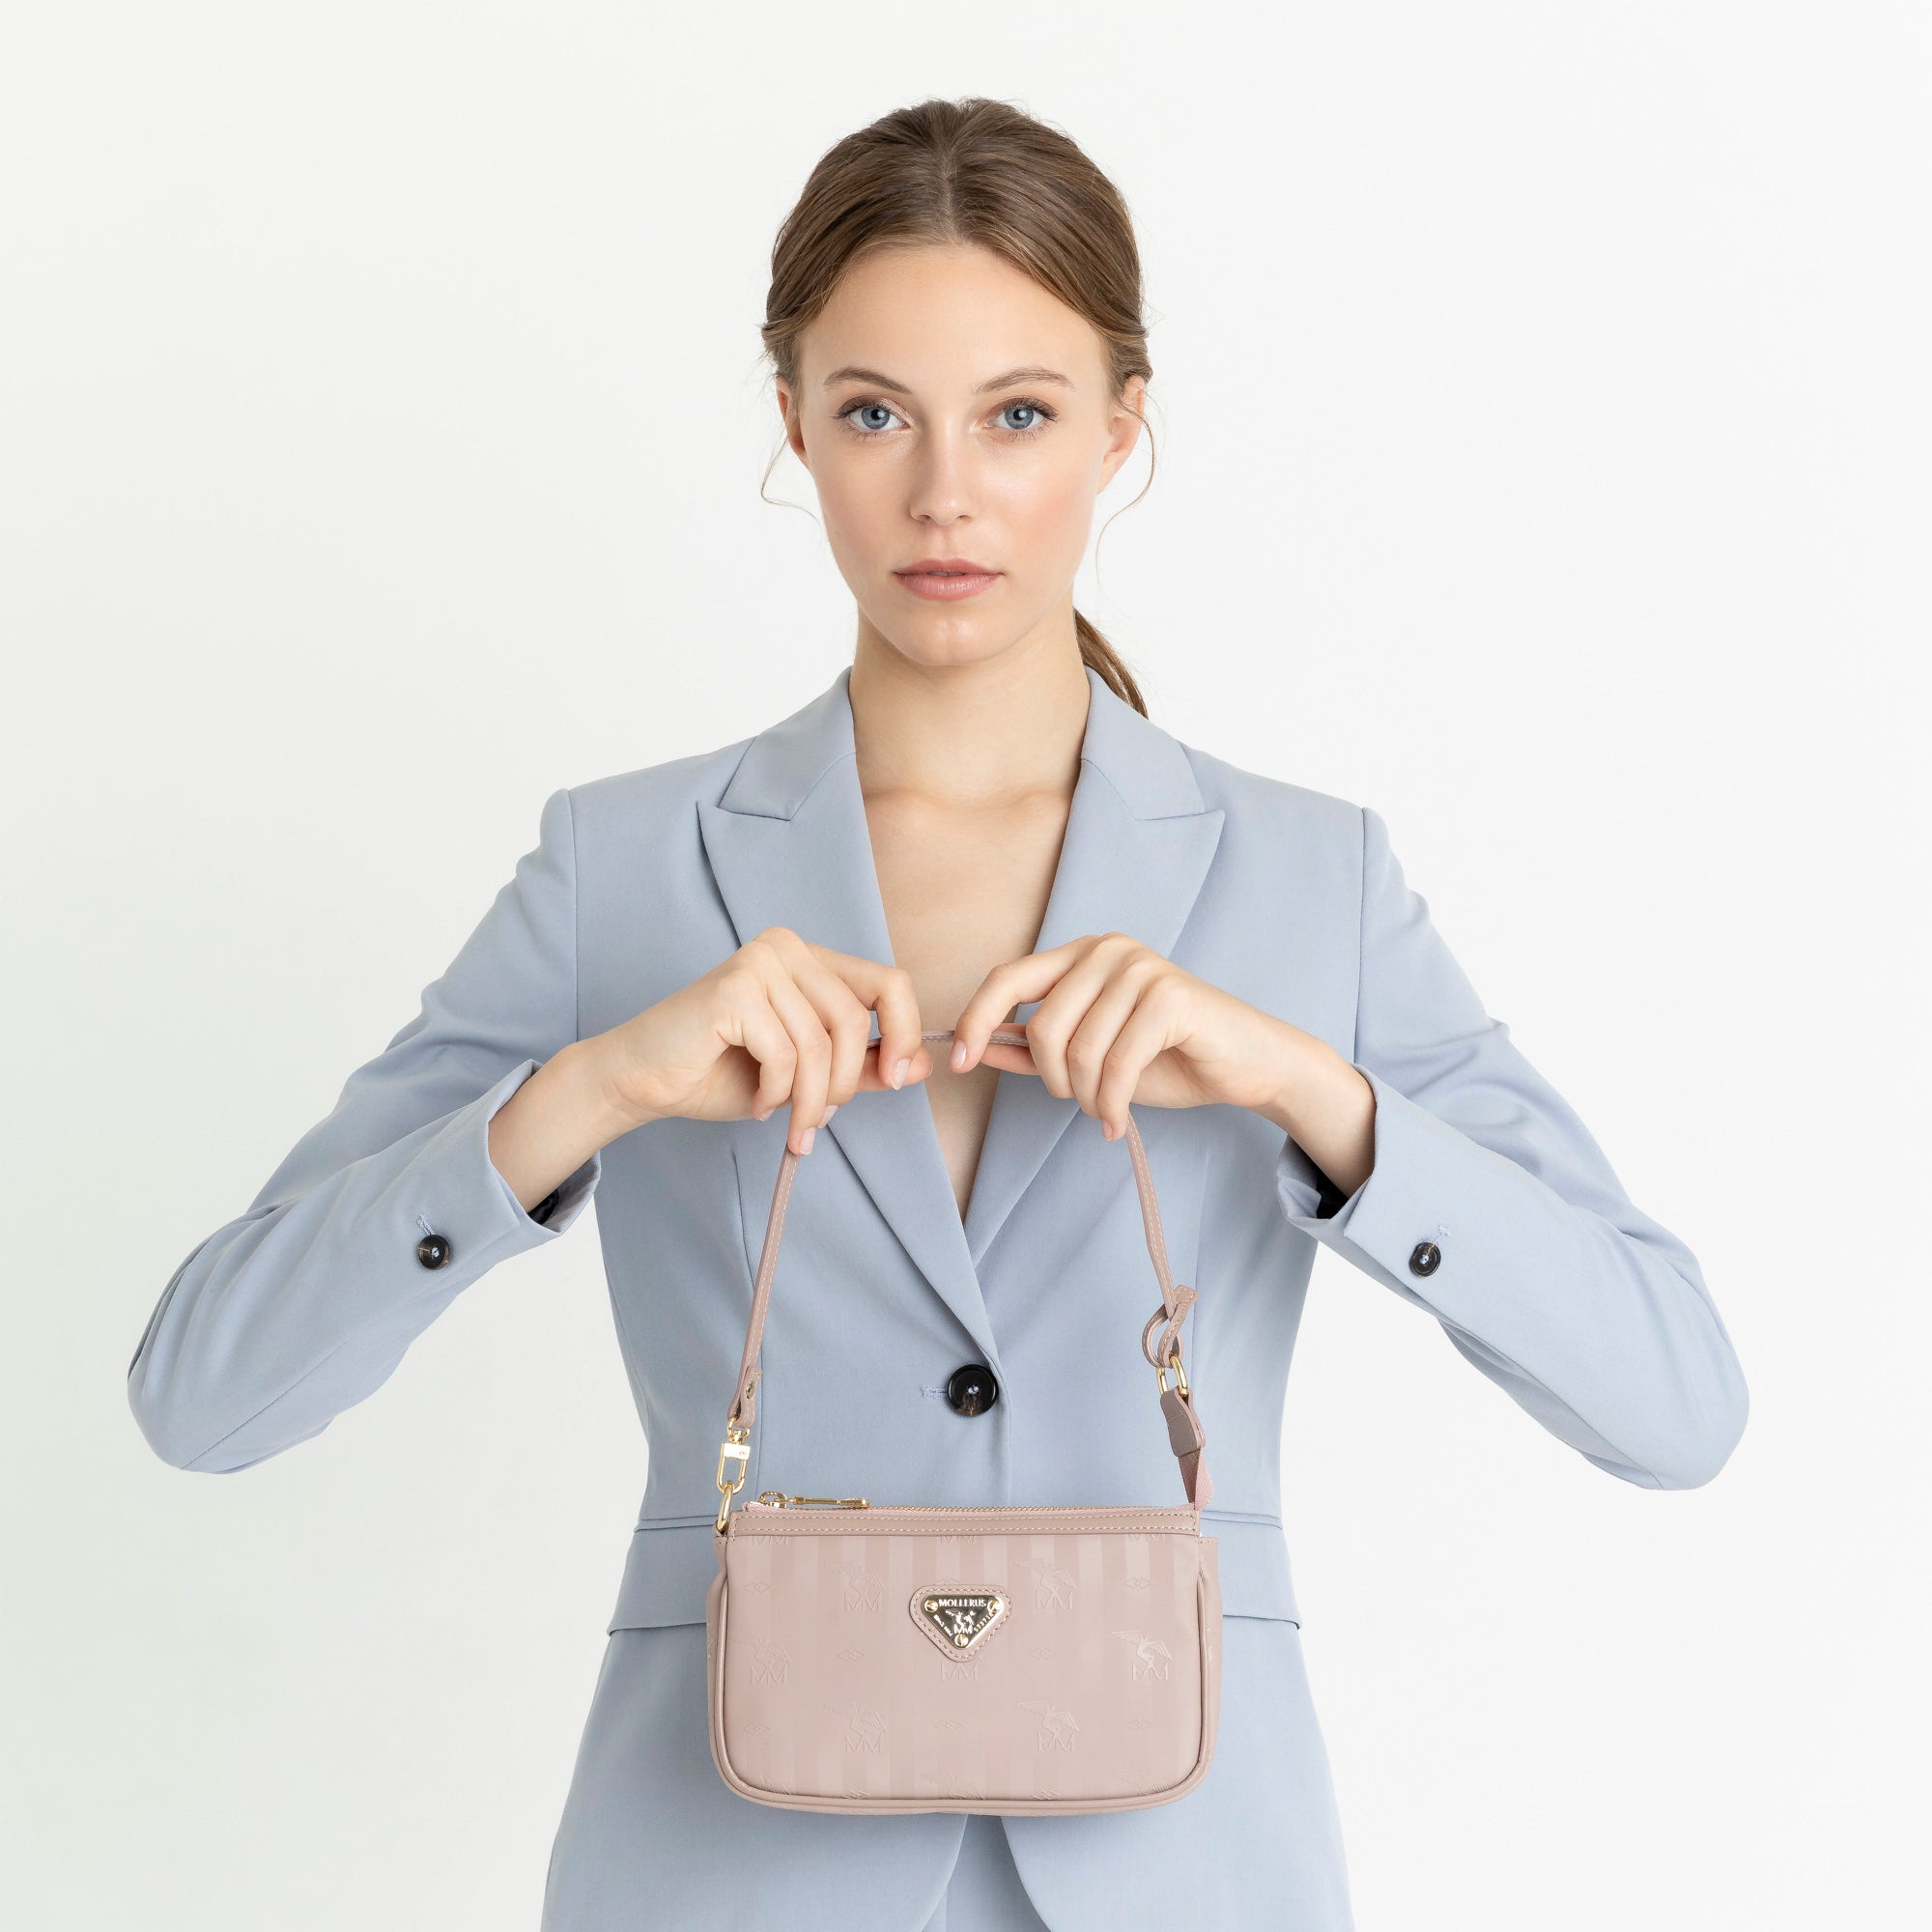 MISSY | Schultertasche soft rosé/gold - FRONTAL